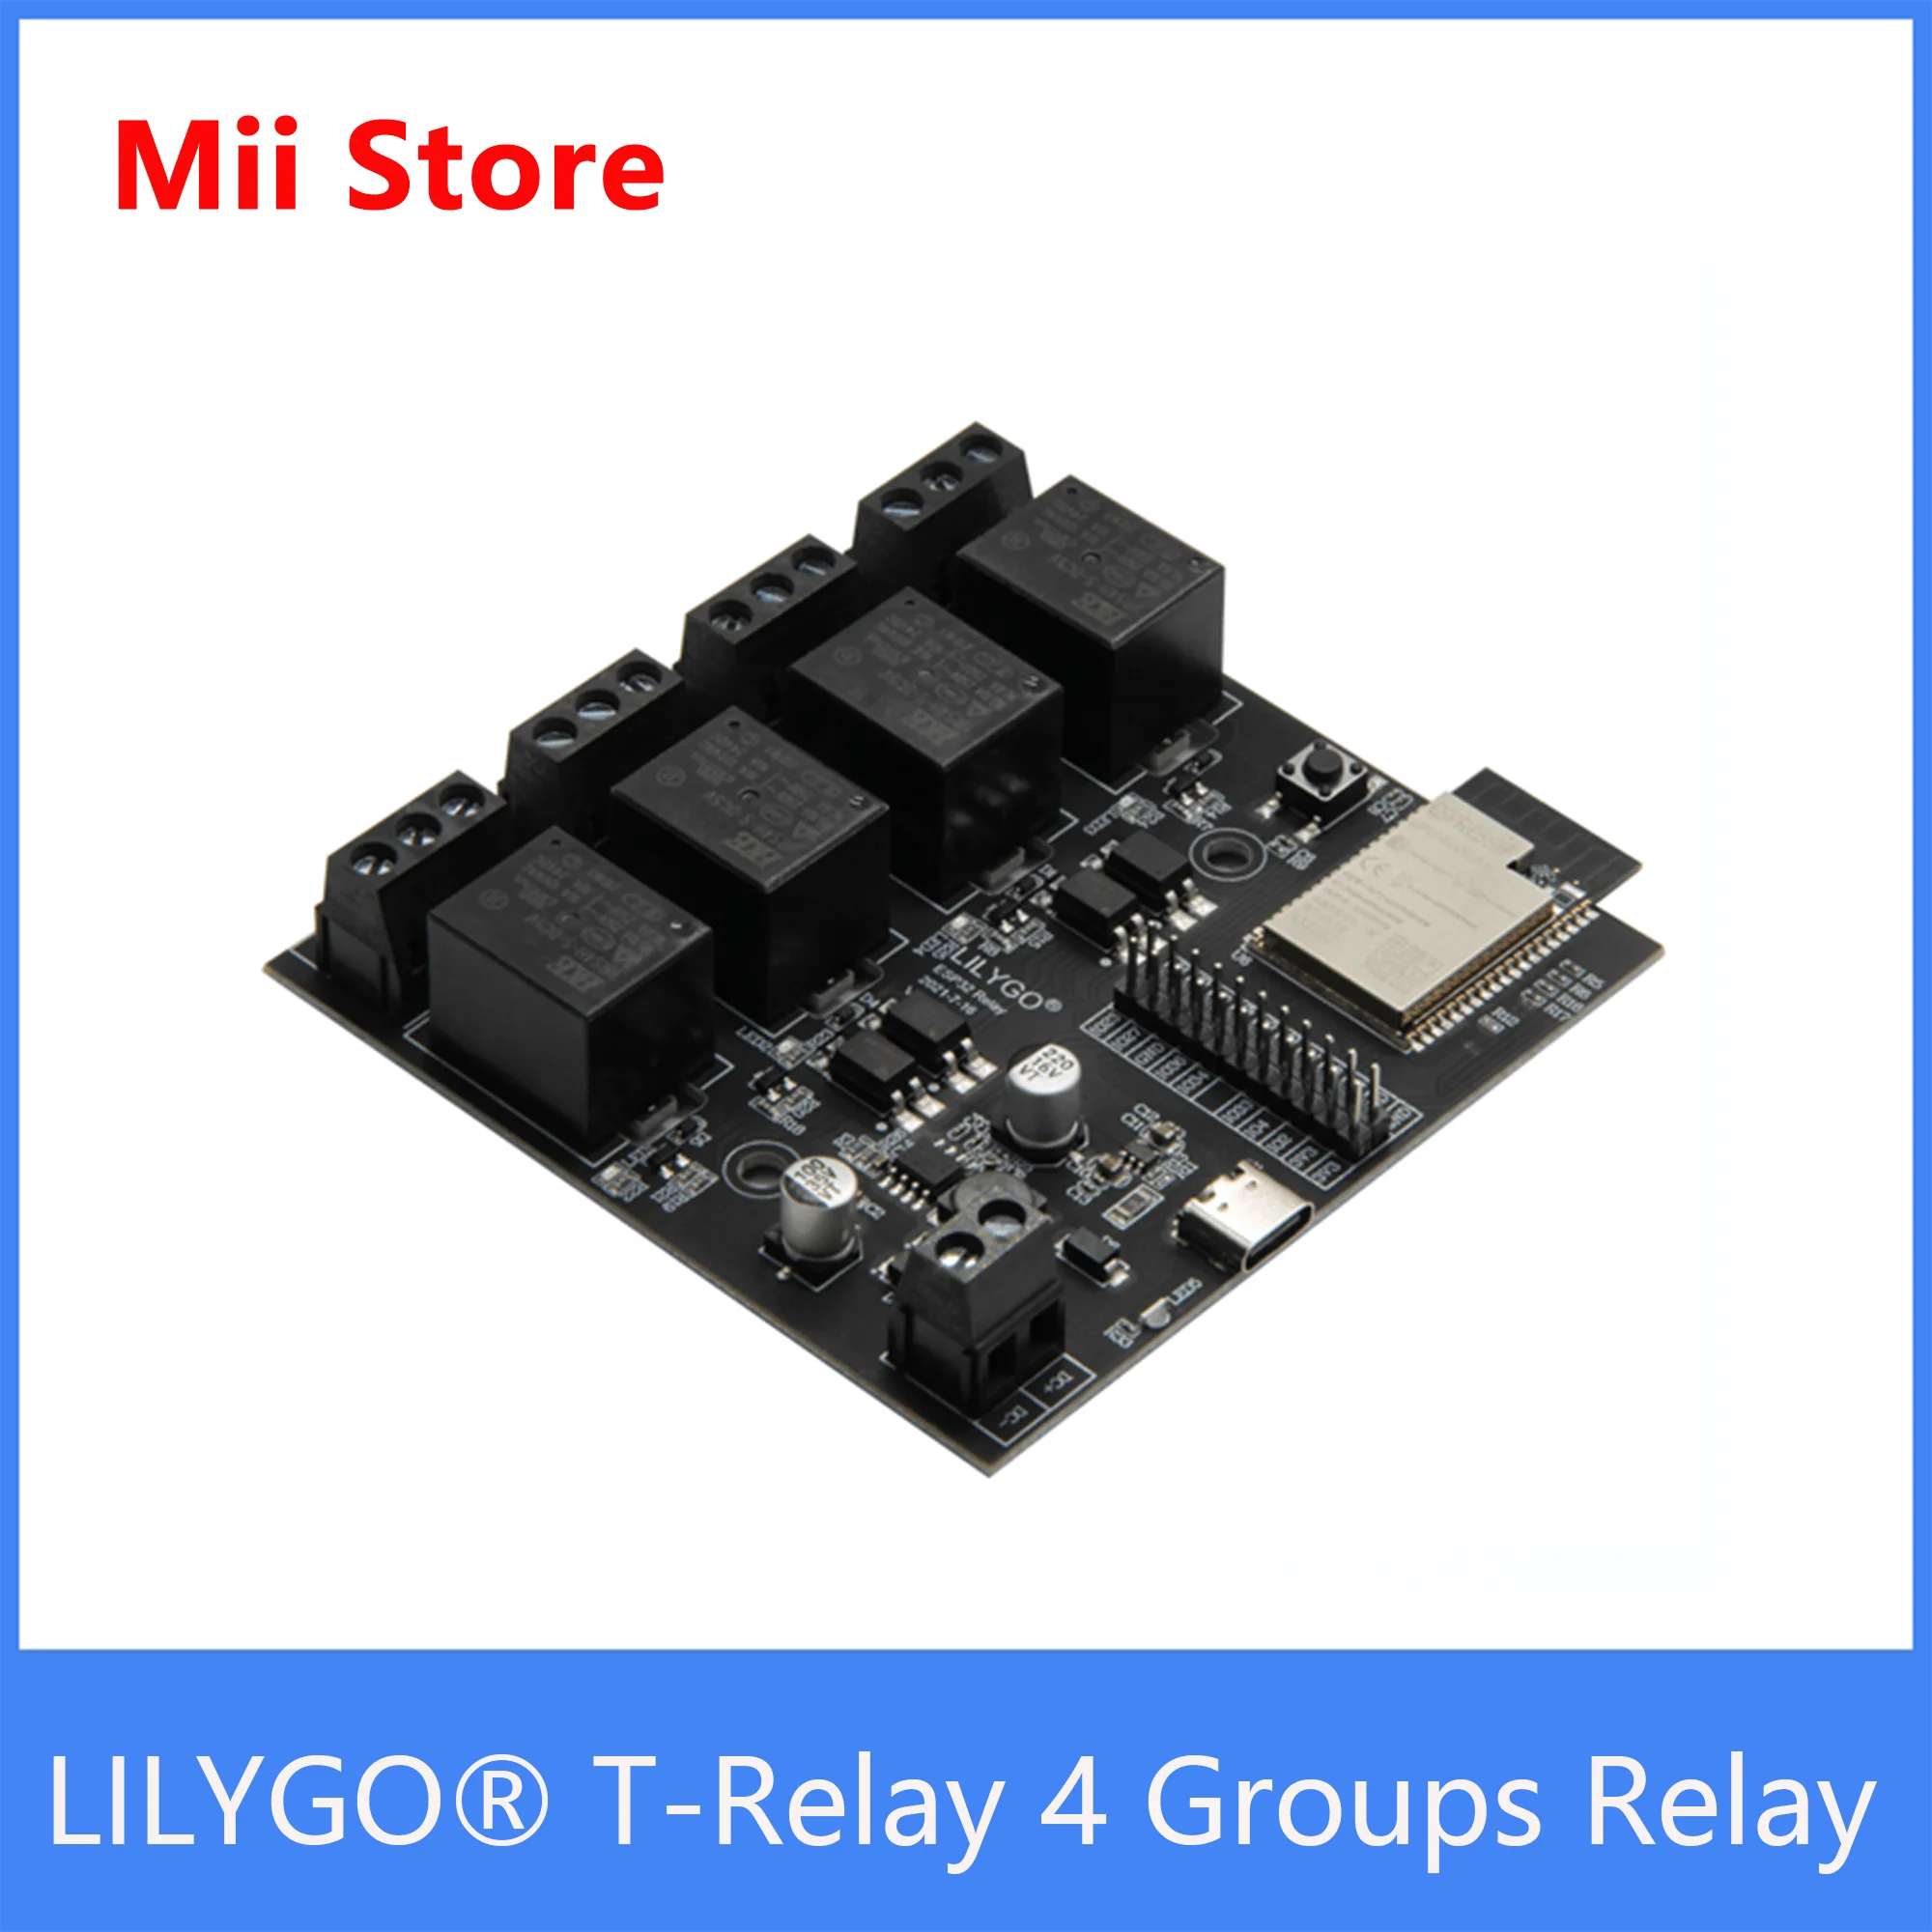 

LILYGO® TTGO T-Relay ESP32 Chip DC 5V 4 Groups Relay 4MB Flash IoT Relay Suport WiFi Bluetooth